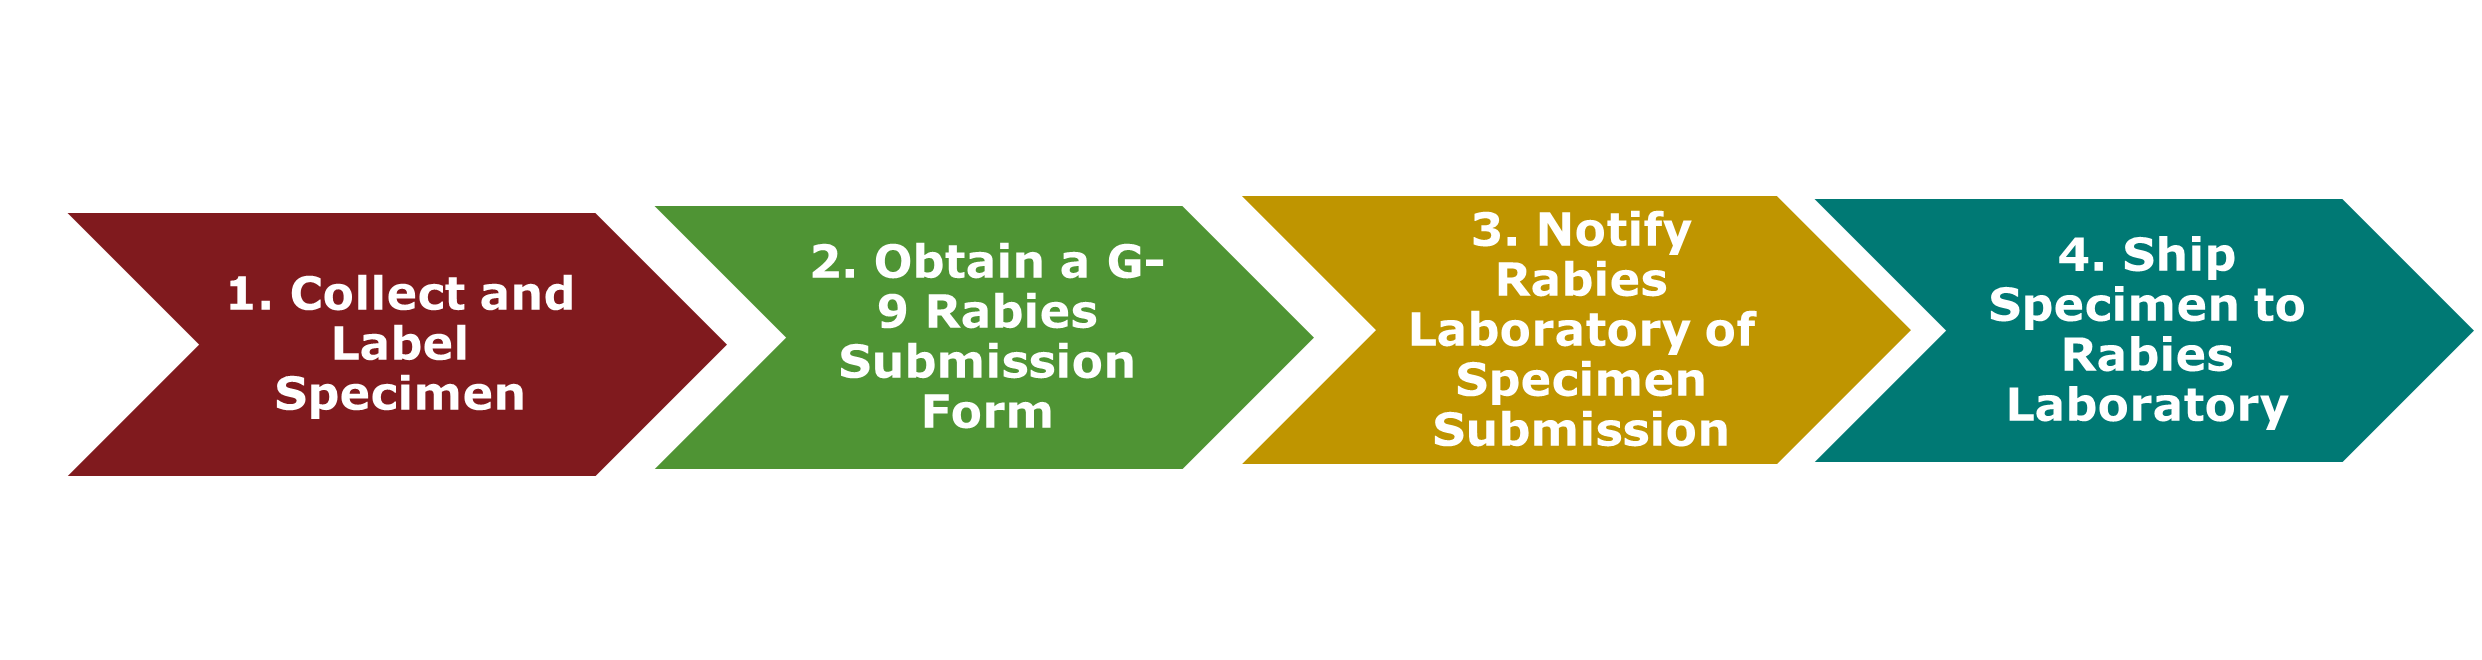 "A four part arrow graphic pointing left to right that identifies the four main steps to submitting rabies specimens to DSHS Laboratory. The arrows read:  1. Collect and Label  Specimen 2. Obtain a G-9 Rabies Submission Form 3. Notify Rabies Laboratory of Specimen  Submission 4. Ship Specimen to Rabies Laboratory"